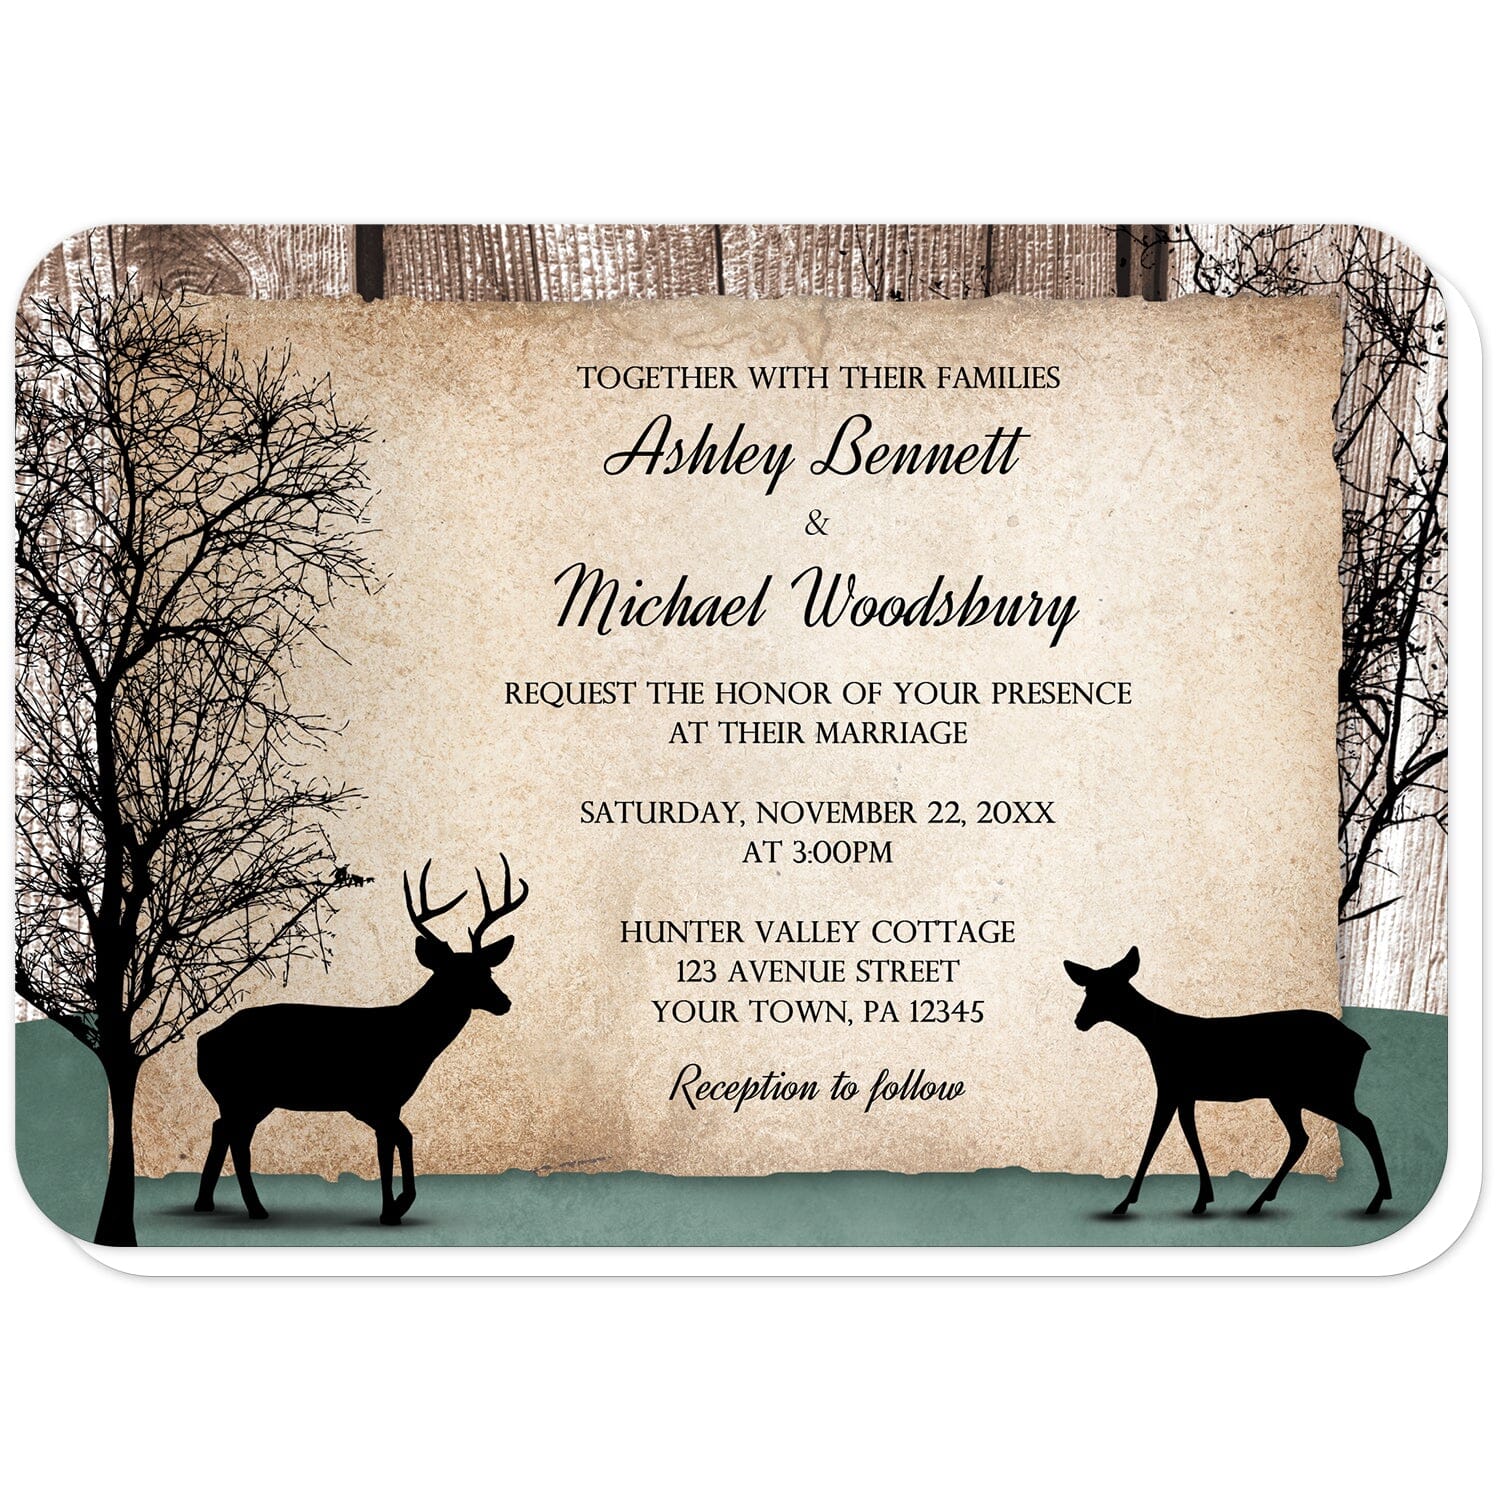 Rustic Woodsy Deer Wedding Invitations (with rounded corners) at Artistically Invited. Rustic woodsy deer wedding invitations designed with silhouettes of a buck deer with antlers, a doe, and winter trees over a wood brown background and a faded hunter green design along the bottom. Your personalized marriage celebration details are custom printed in black over a tattered rustic paper illustration between the deer.